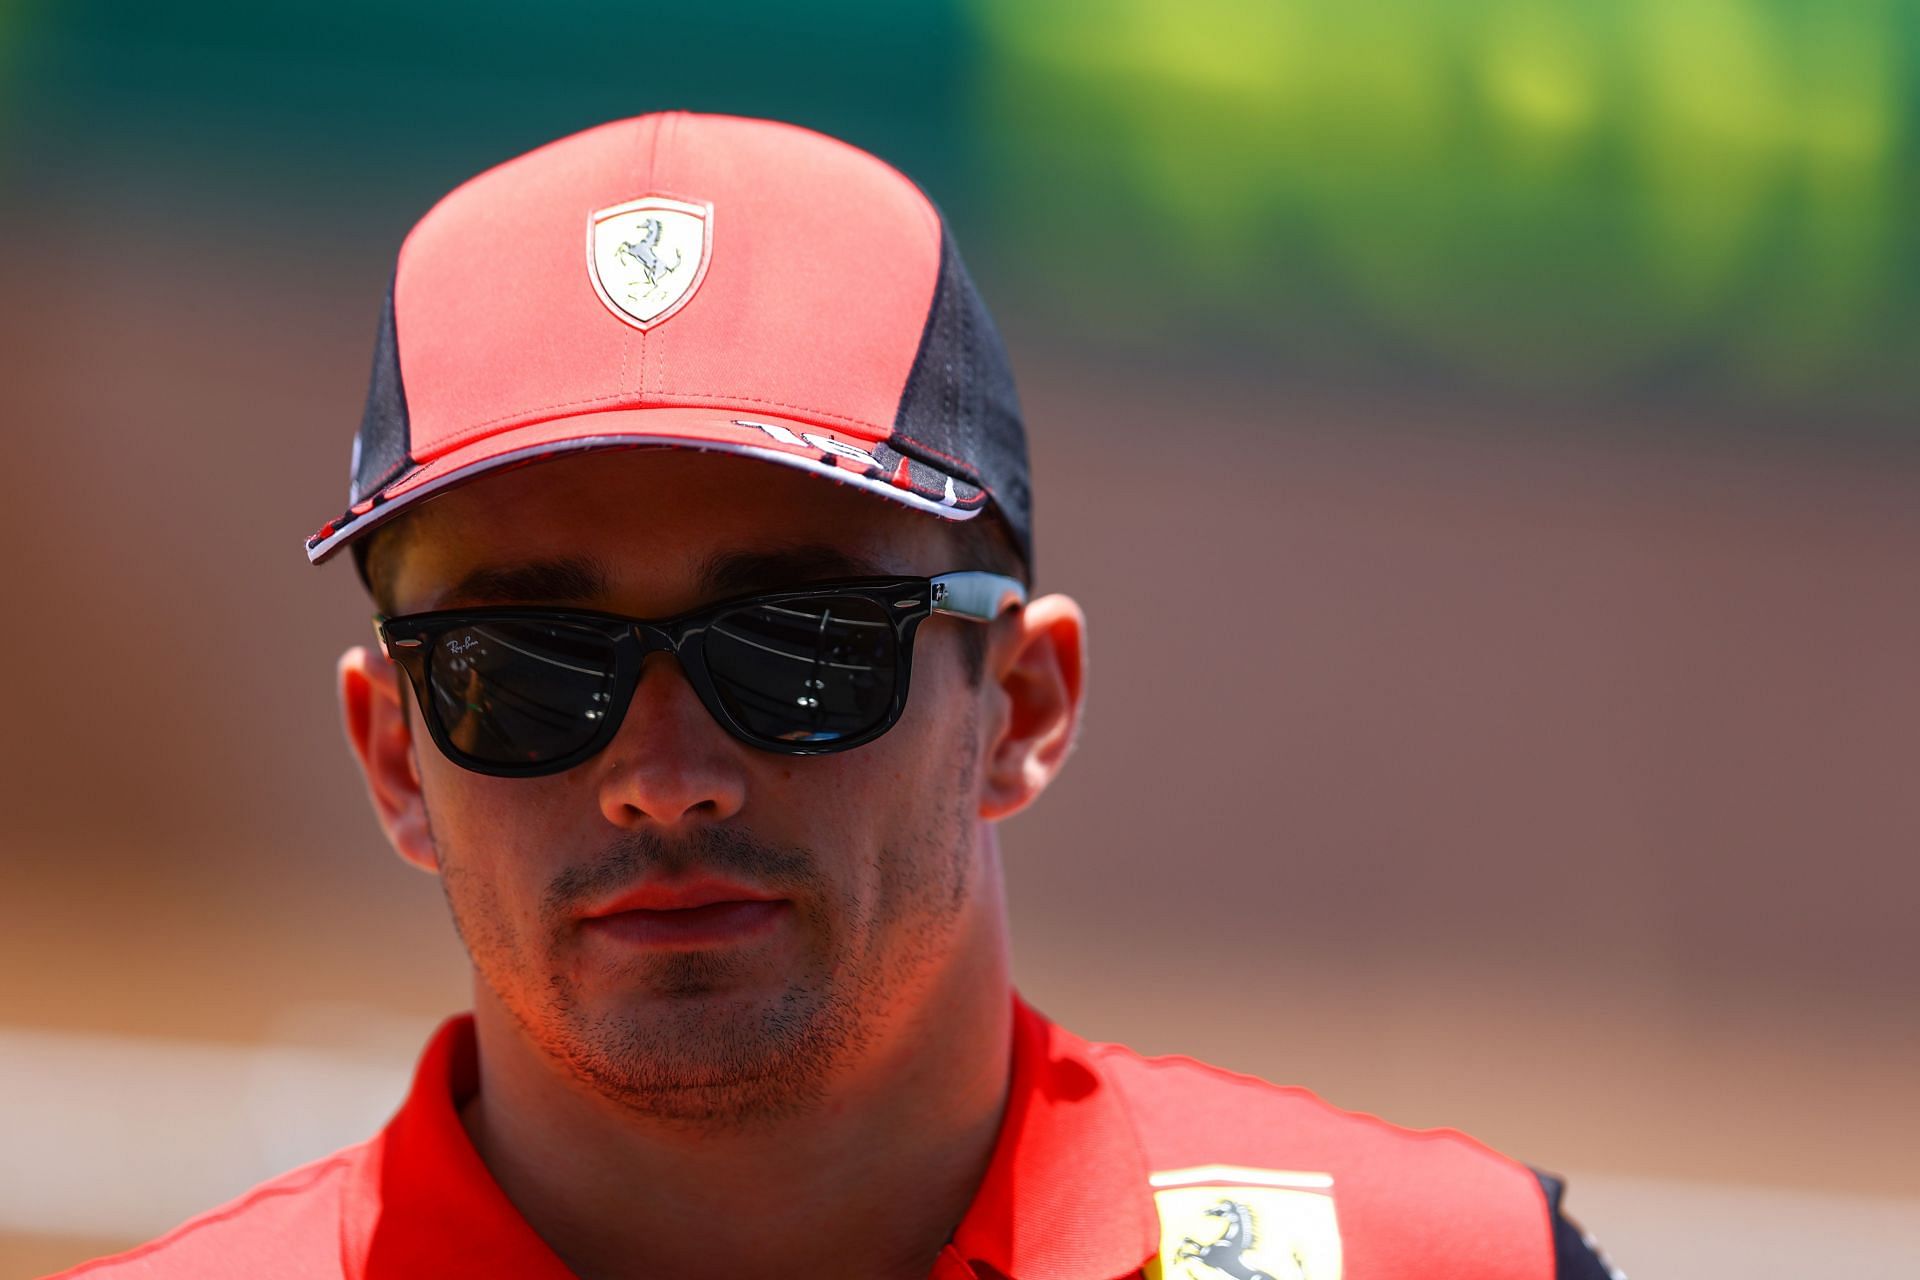 Charles Leclerc at the F1 Grand Prix of Spain